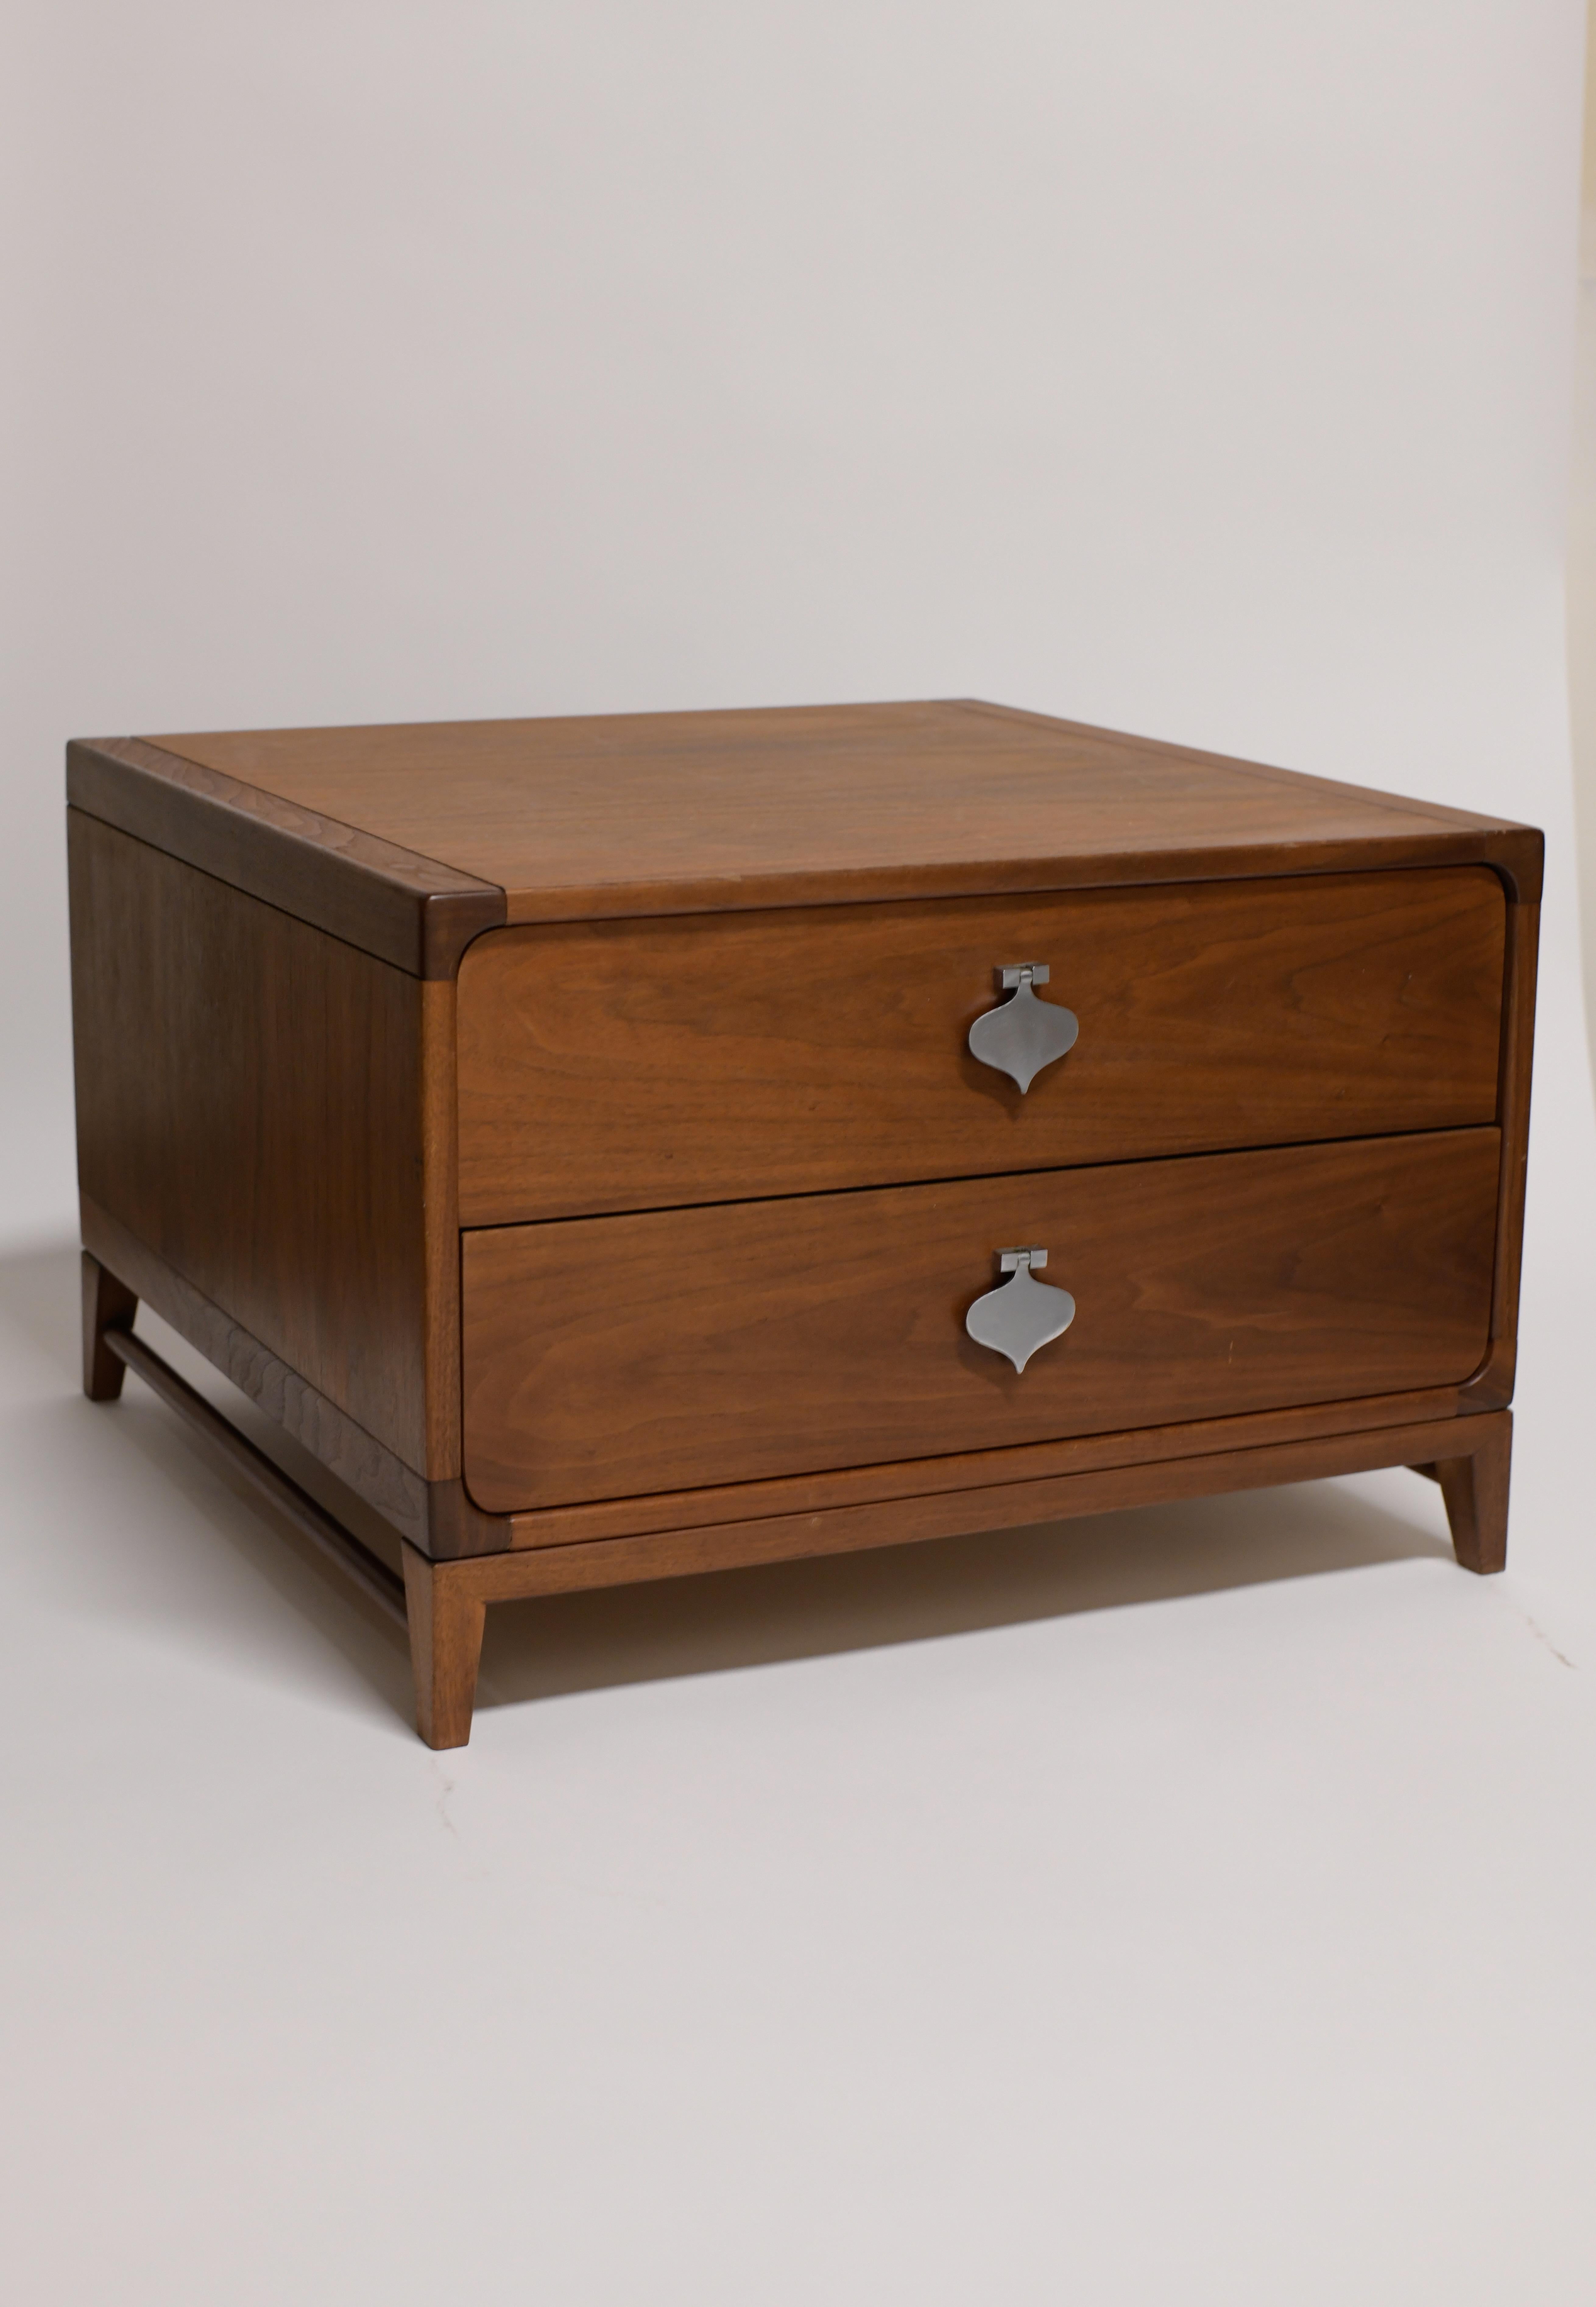 Nice end table/nightstand by John Keal for Brown Saltman of California. The piece features two large drawers with spade shaped pulls and dovetailed construction. The Brown Saltman logo remains on the inside of the top drawer. 

This end table is in